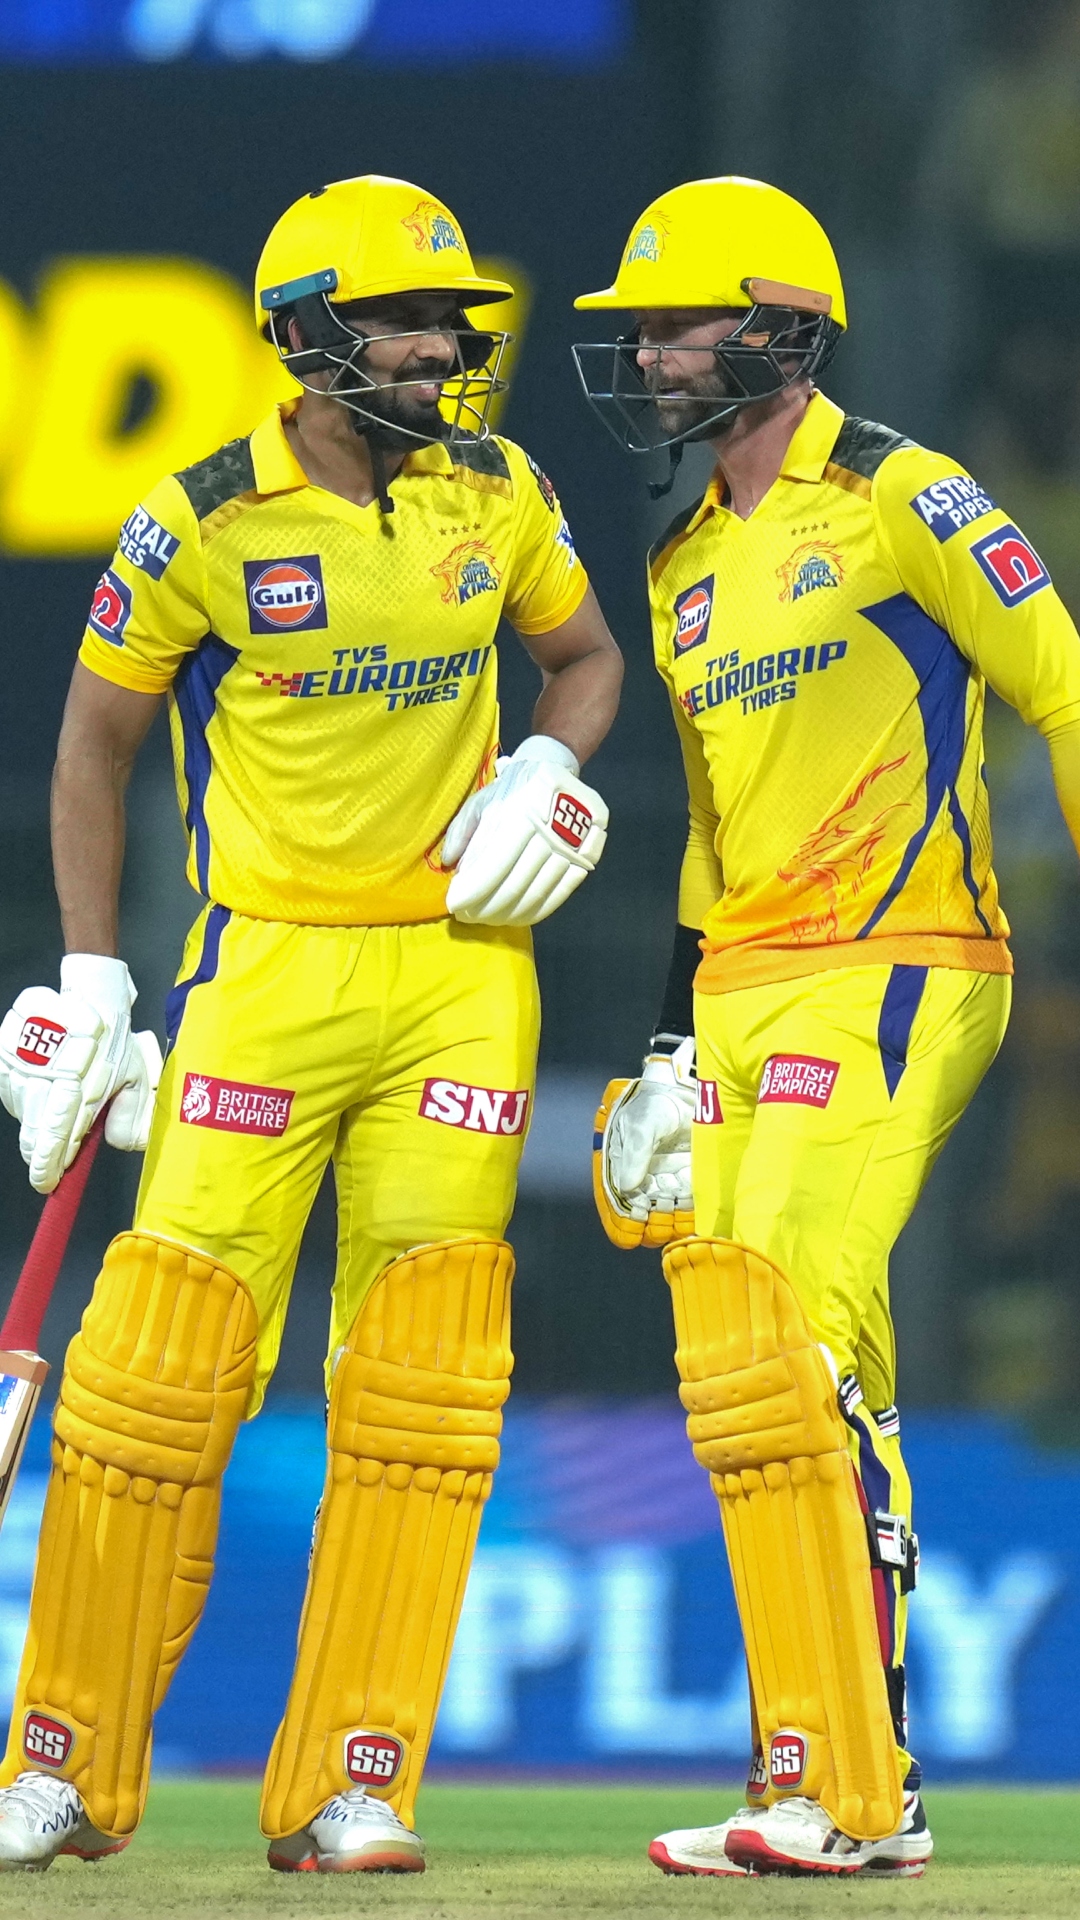 10 highest successful chases against Chennai Super Kings in IPL (as of 30th April 2023)